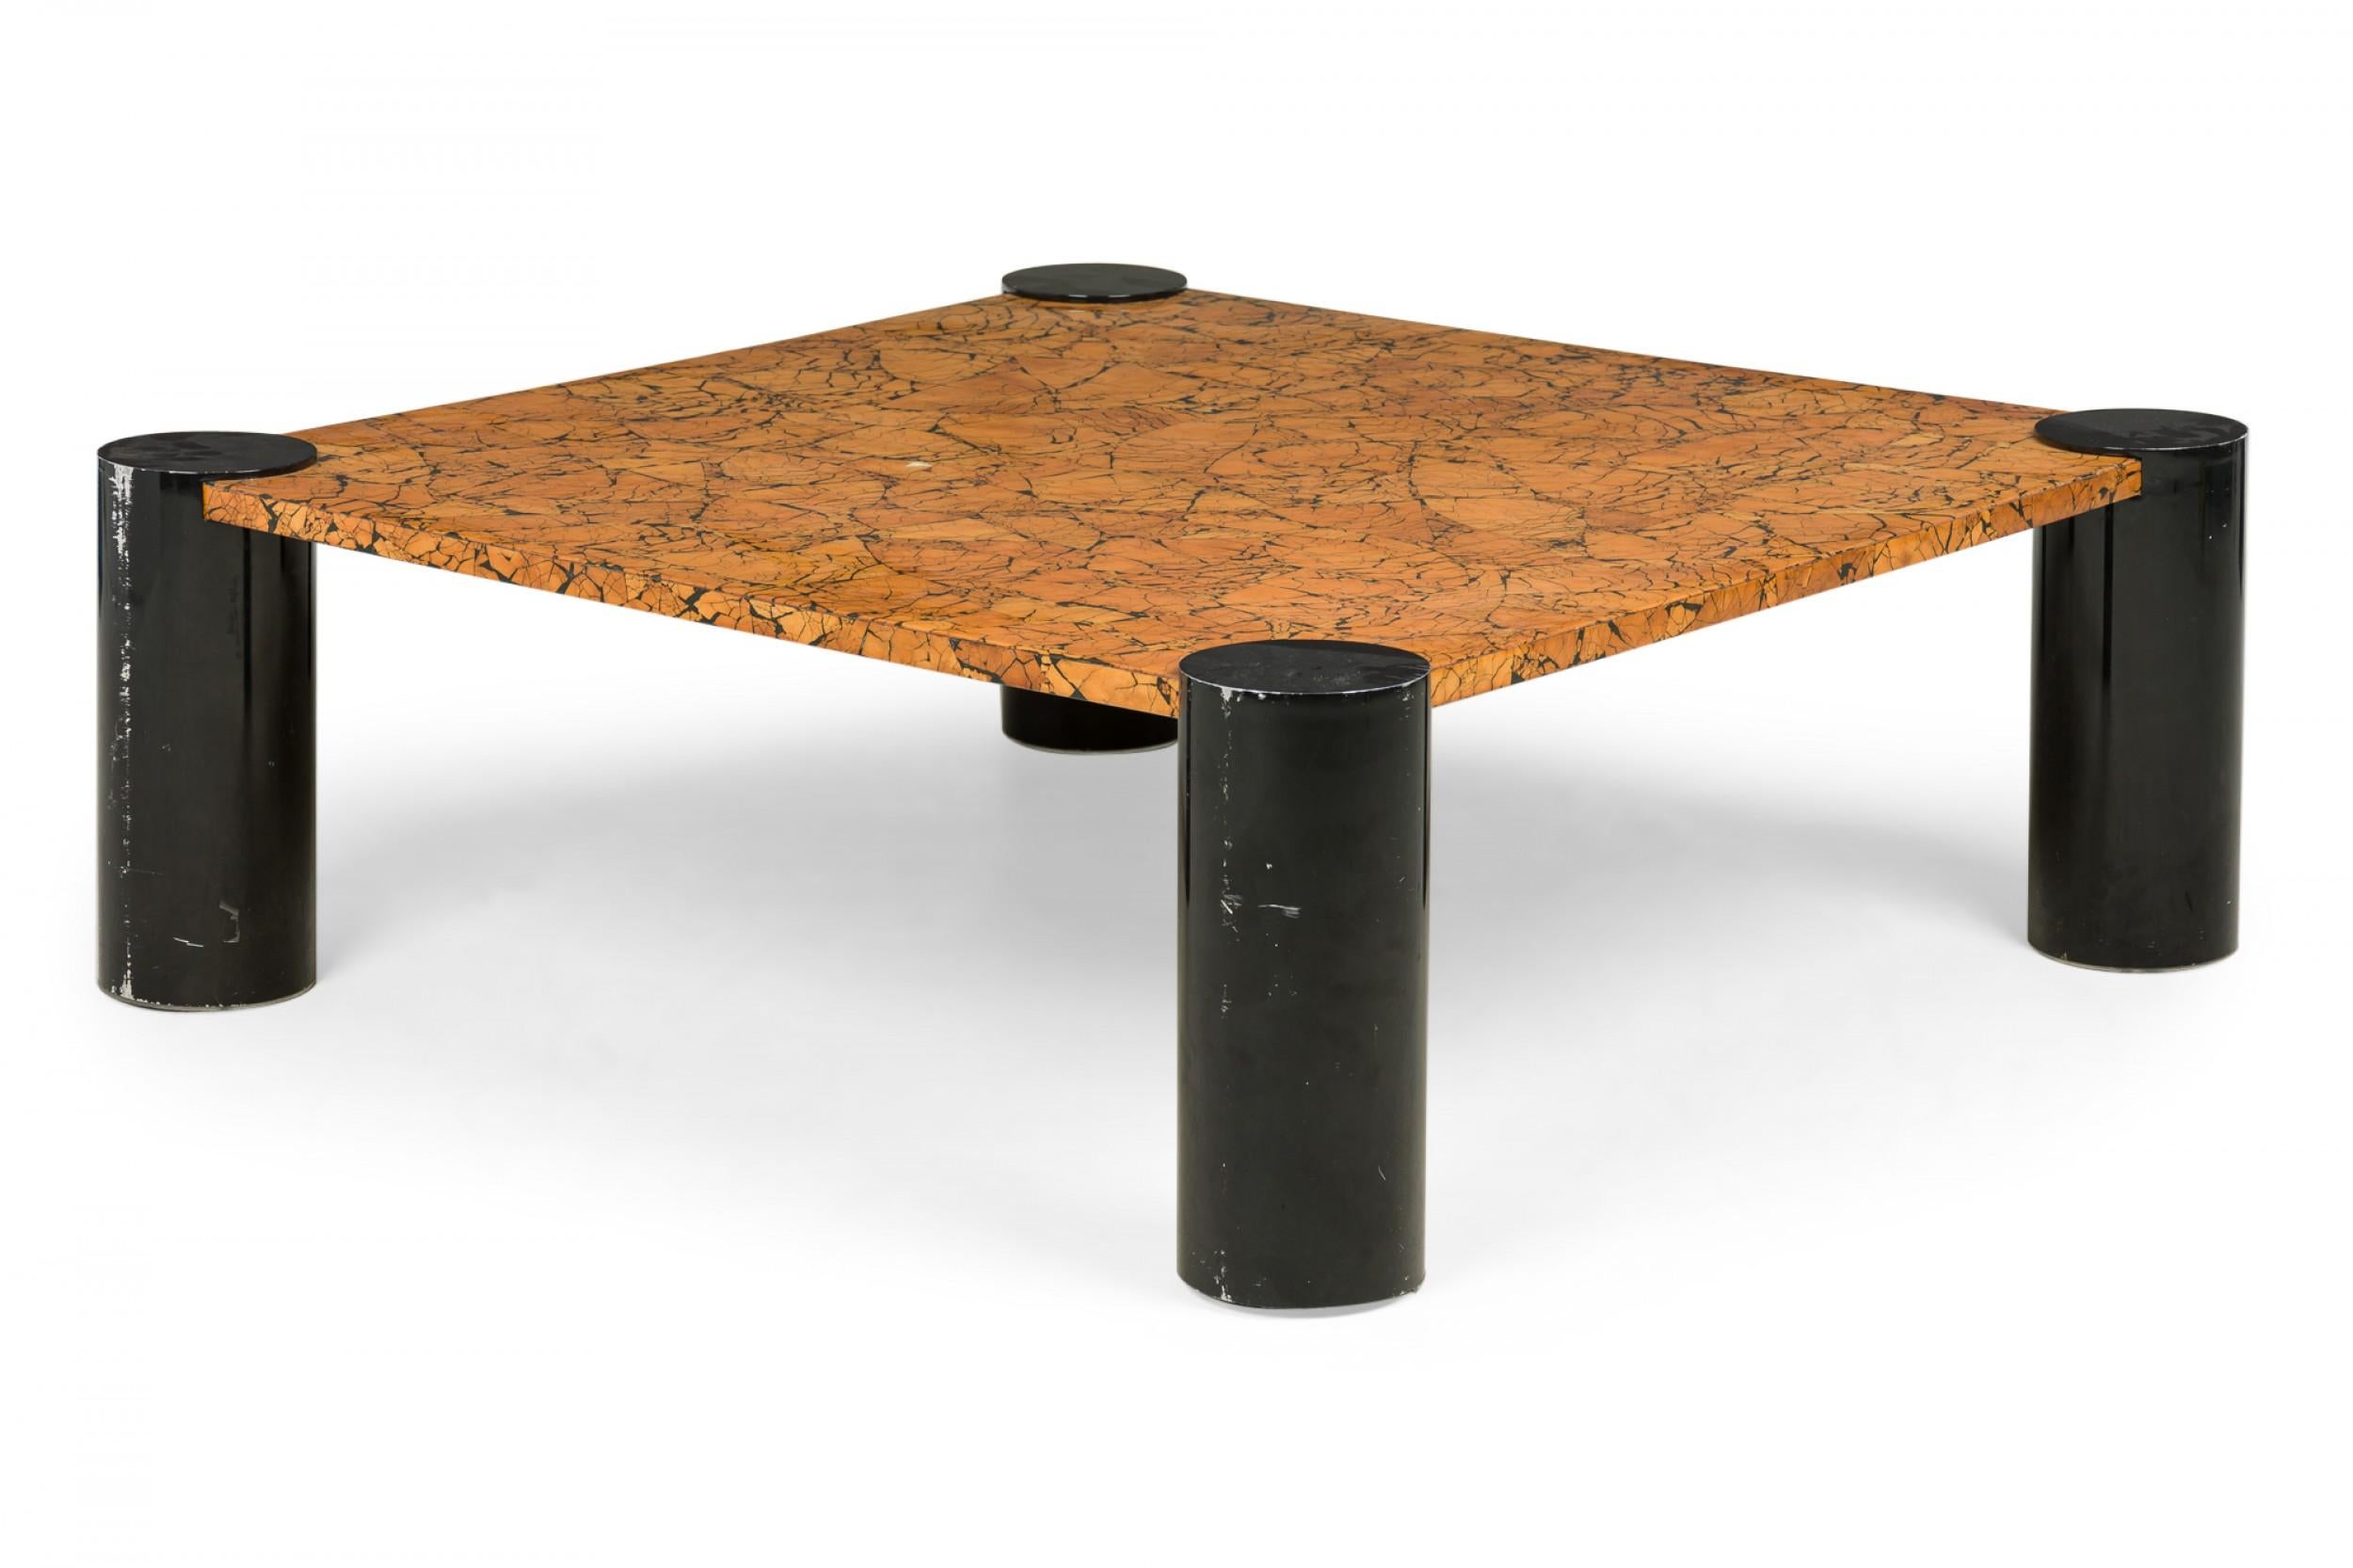 American Mid-Century (1970s) enameled low / coffee table with a square black and brown crackle patterned tabletop supported by four cylindrical ebonized legs.
 

 Wear to finish from age & use, chip on top.
